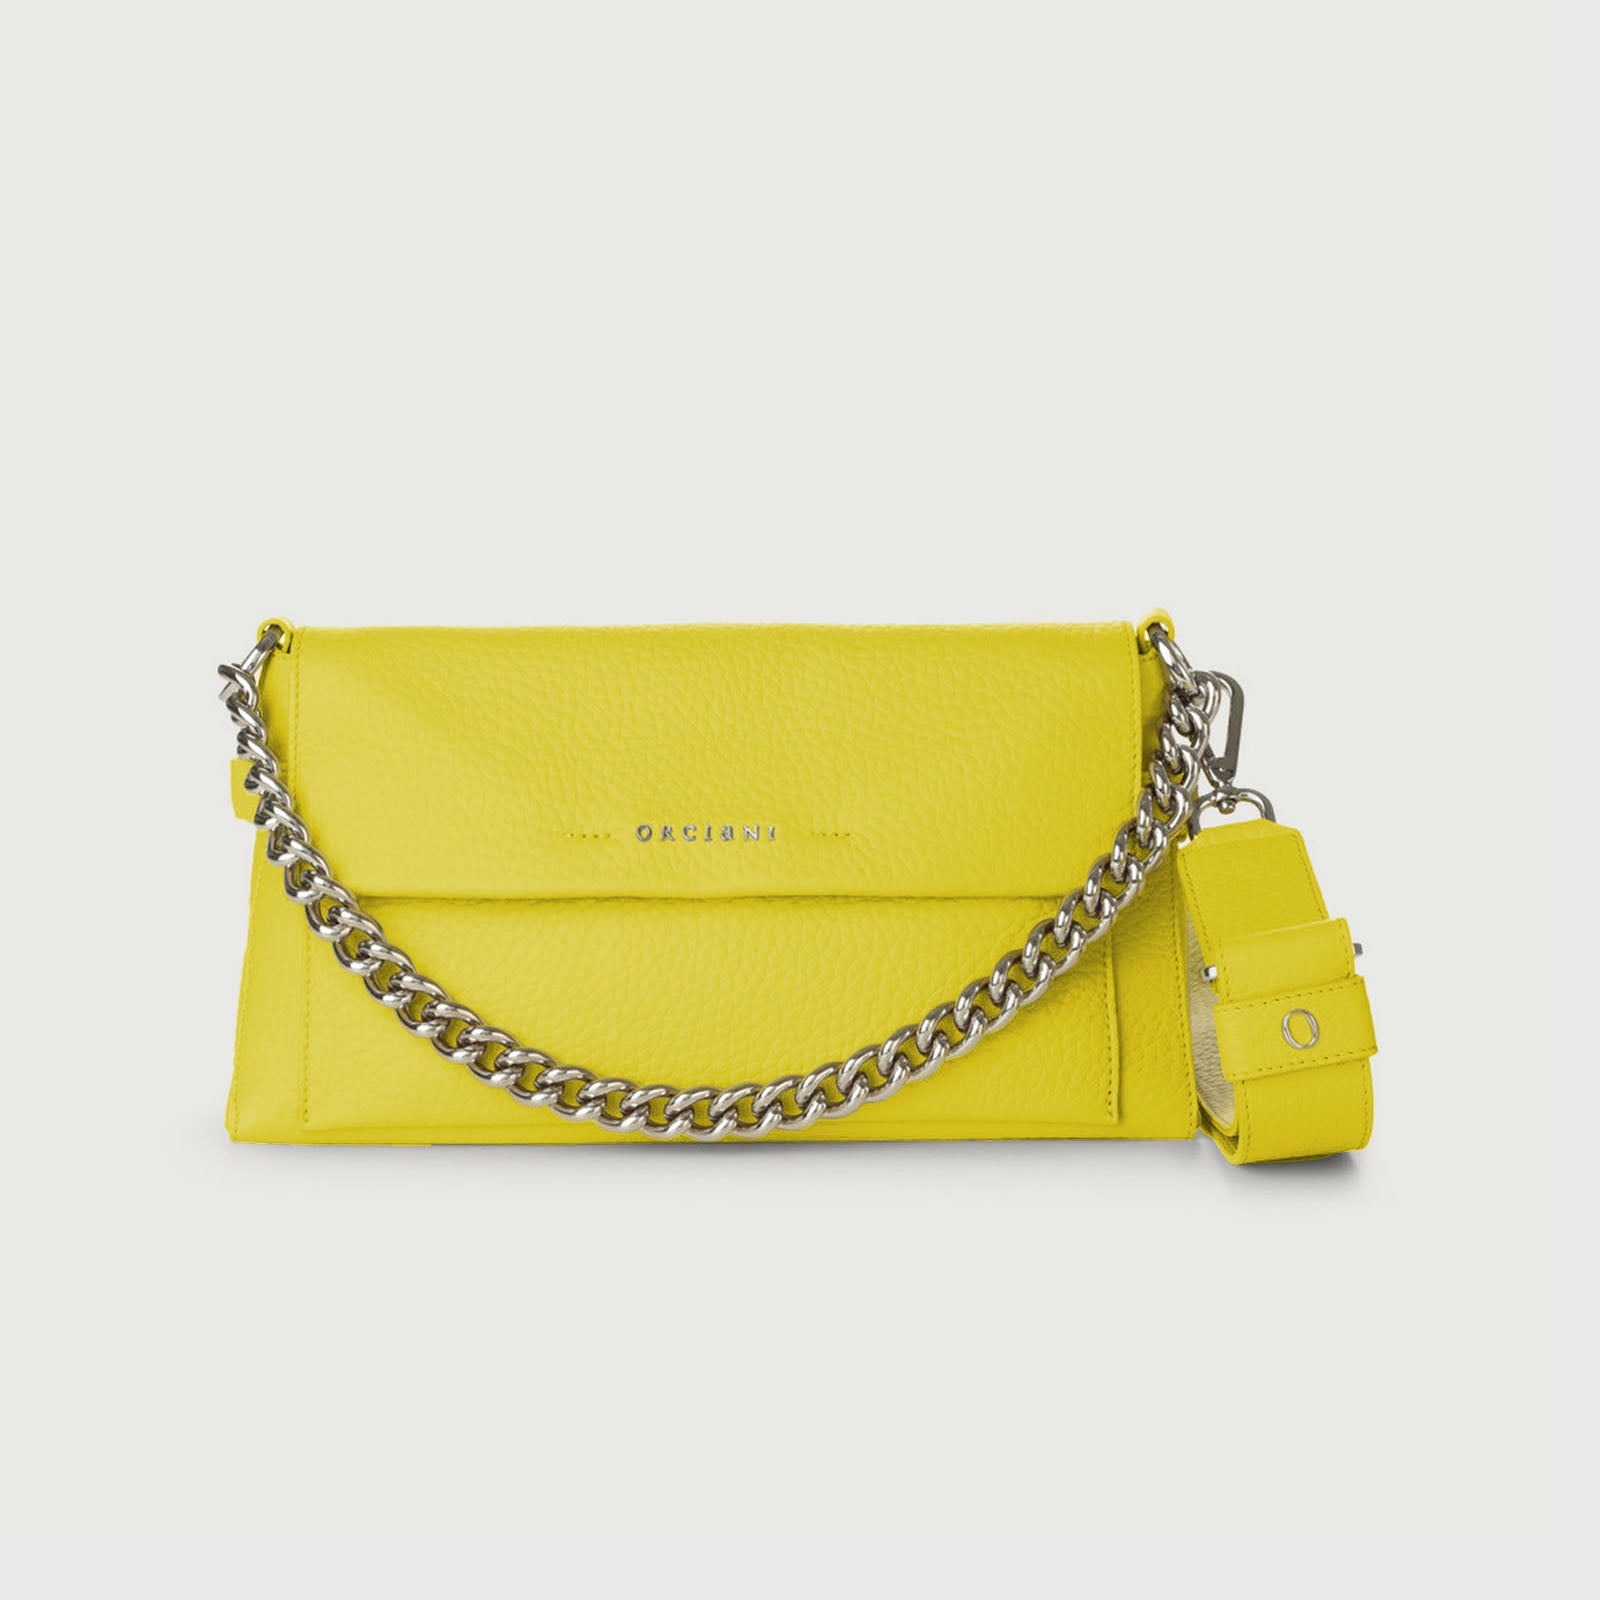 Orciani Shoulder Bag Missy Longuette Soft in Yellow Leather - 5